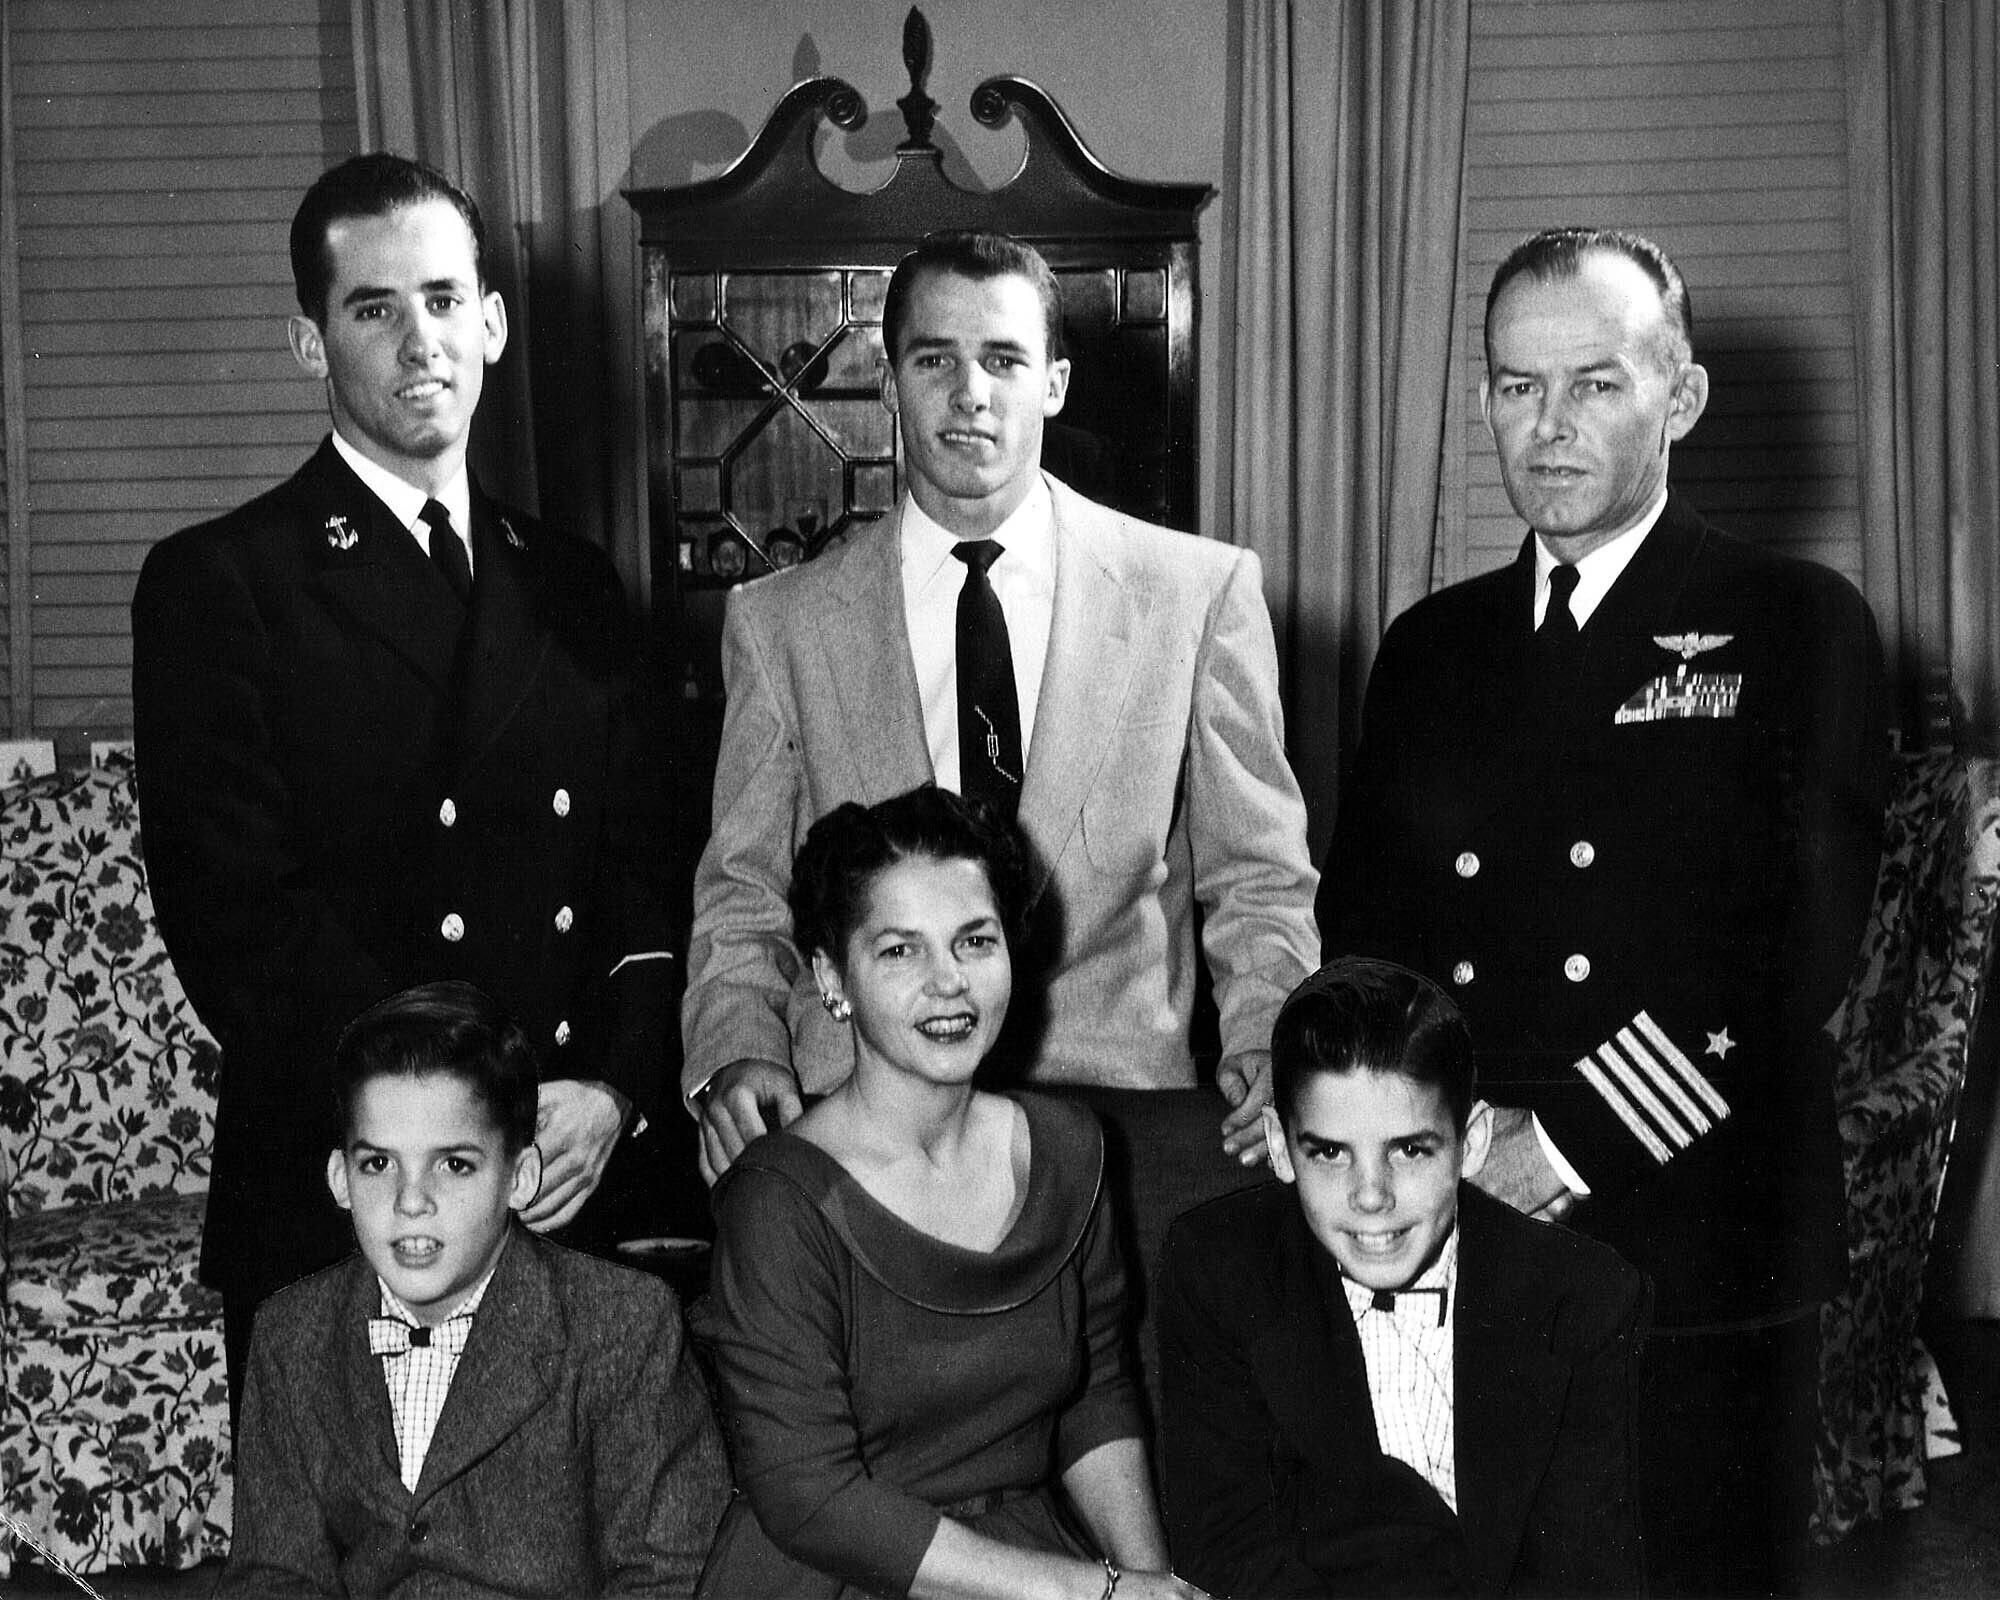 Primary Image of The Flatley Family in 1957